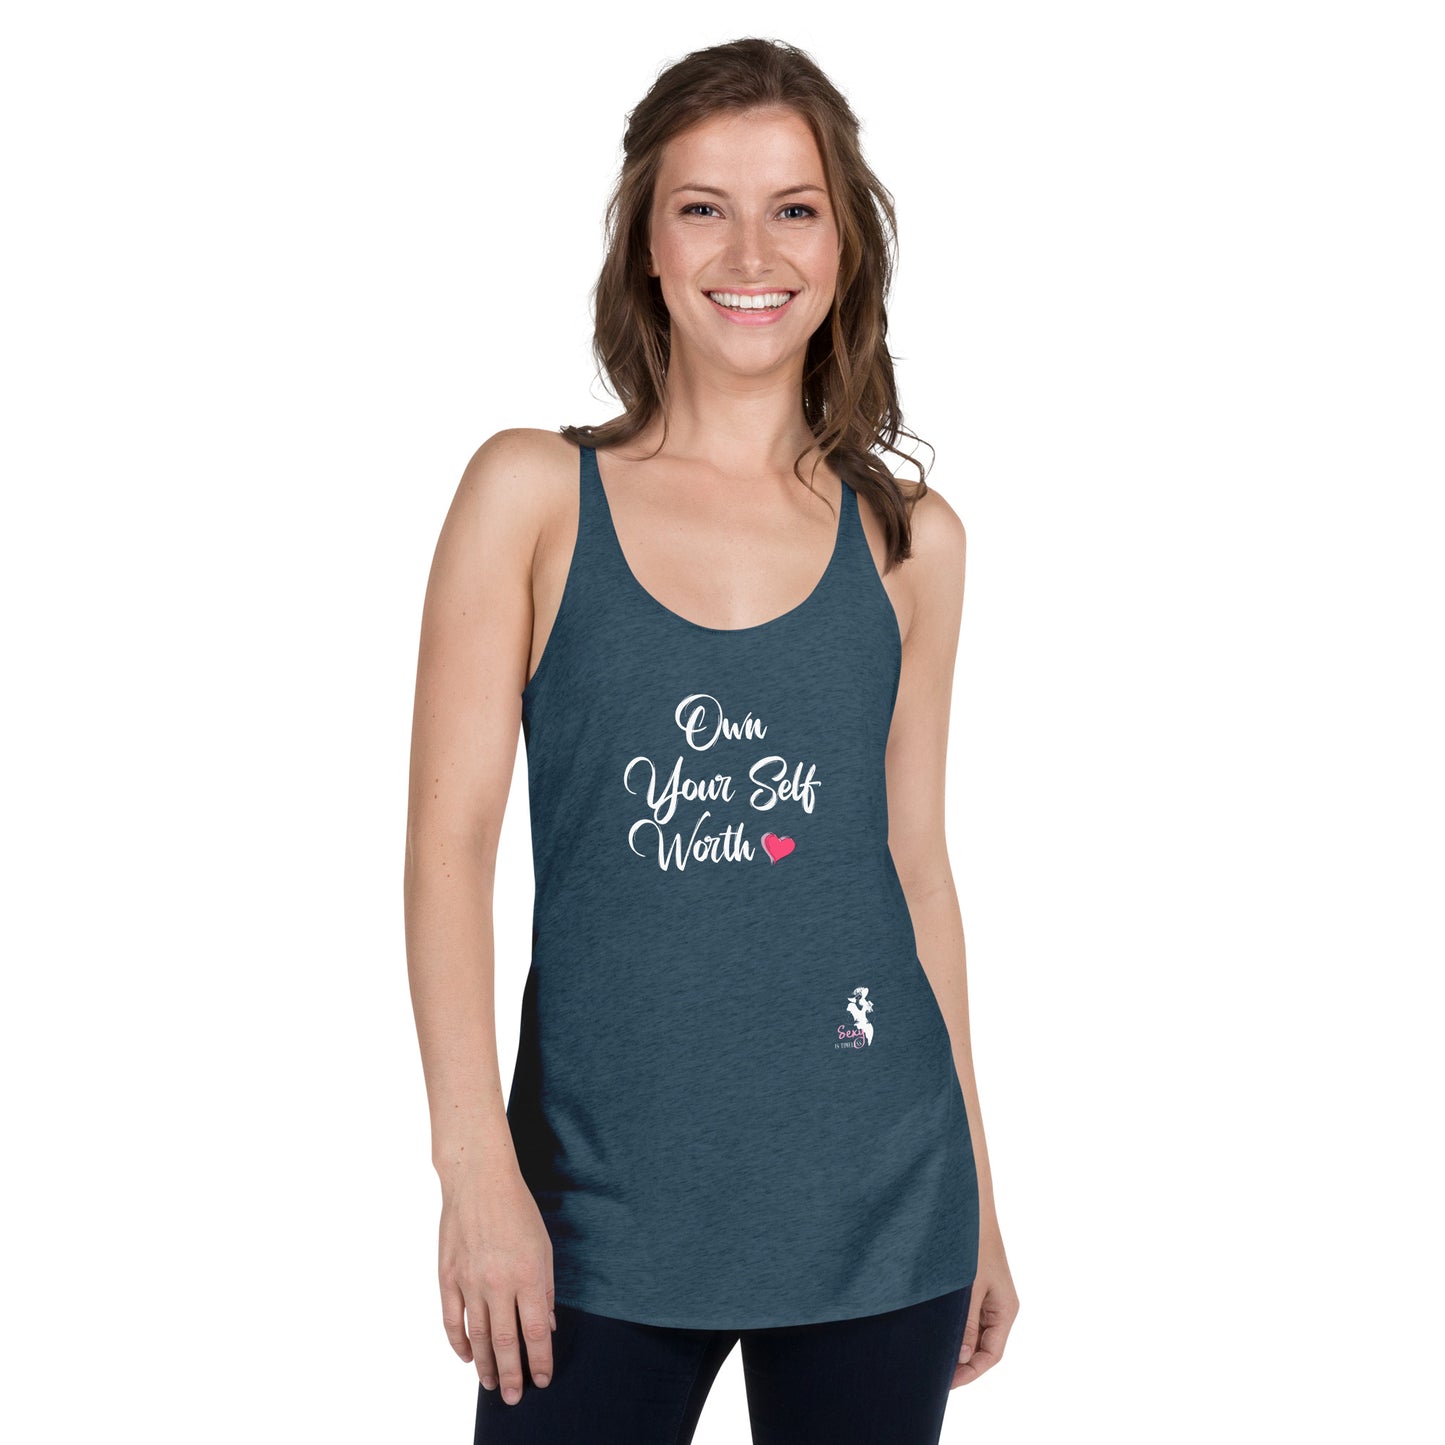 Women's Racerback Tank- Own your ser worth - Colors